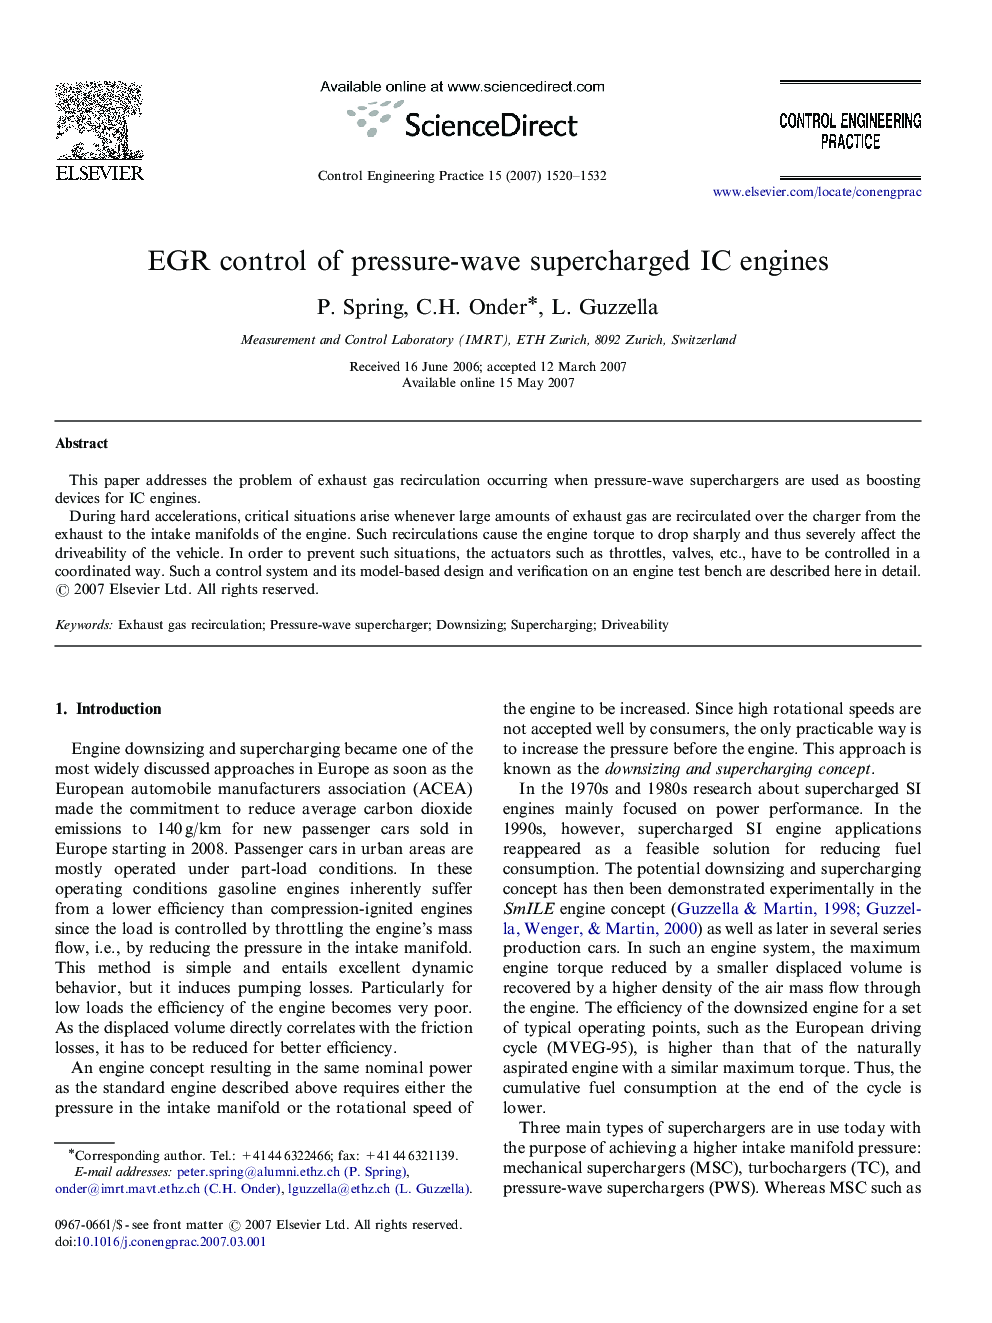 EGR control of pressure-wave supercharged IC engines